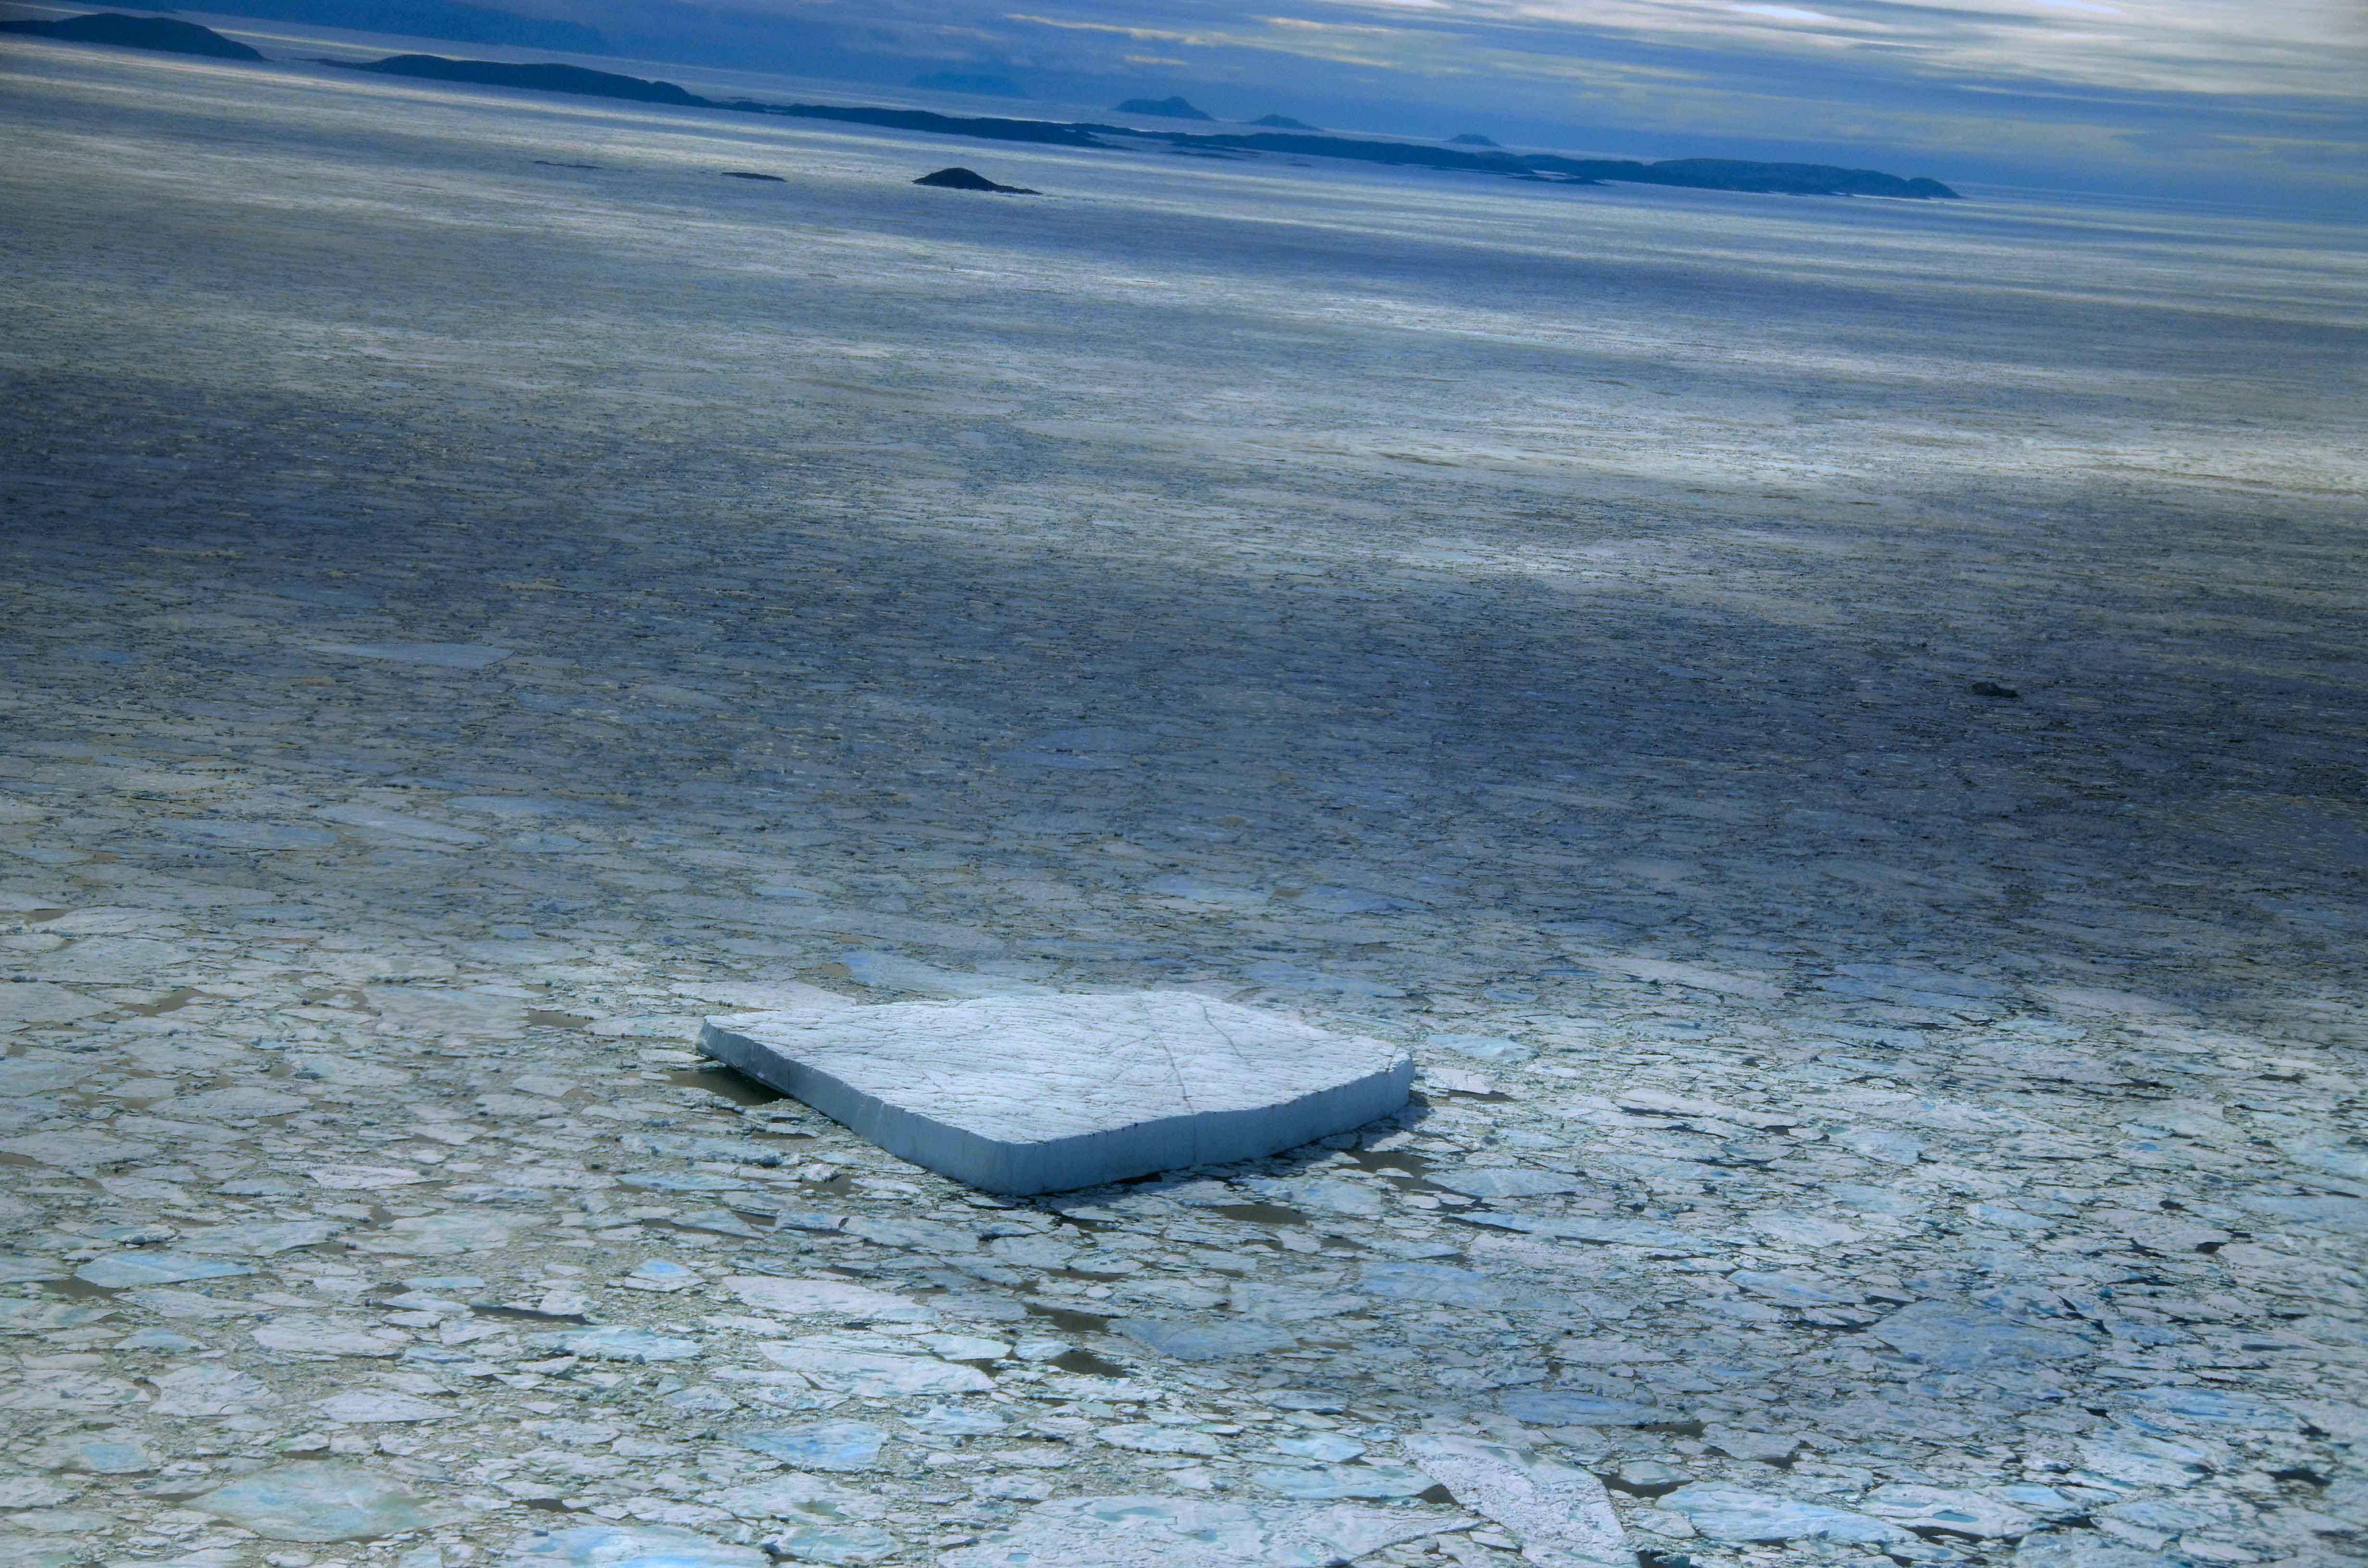 View from a low-flying plane of a sea covered in a mosaic of ice fragments, with a large, rectangular iceberg floating on top.